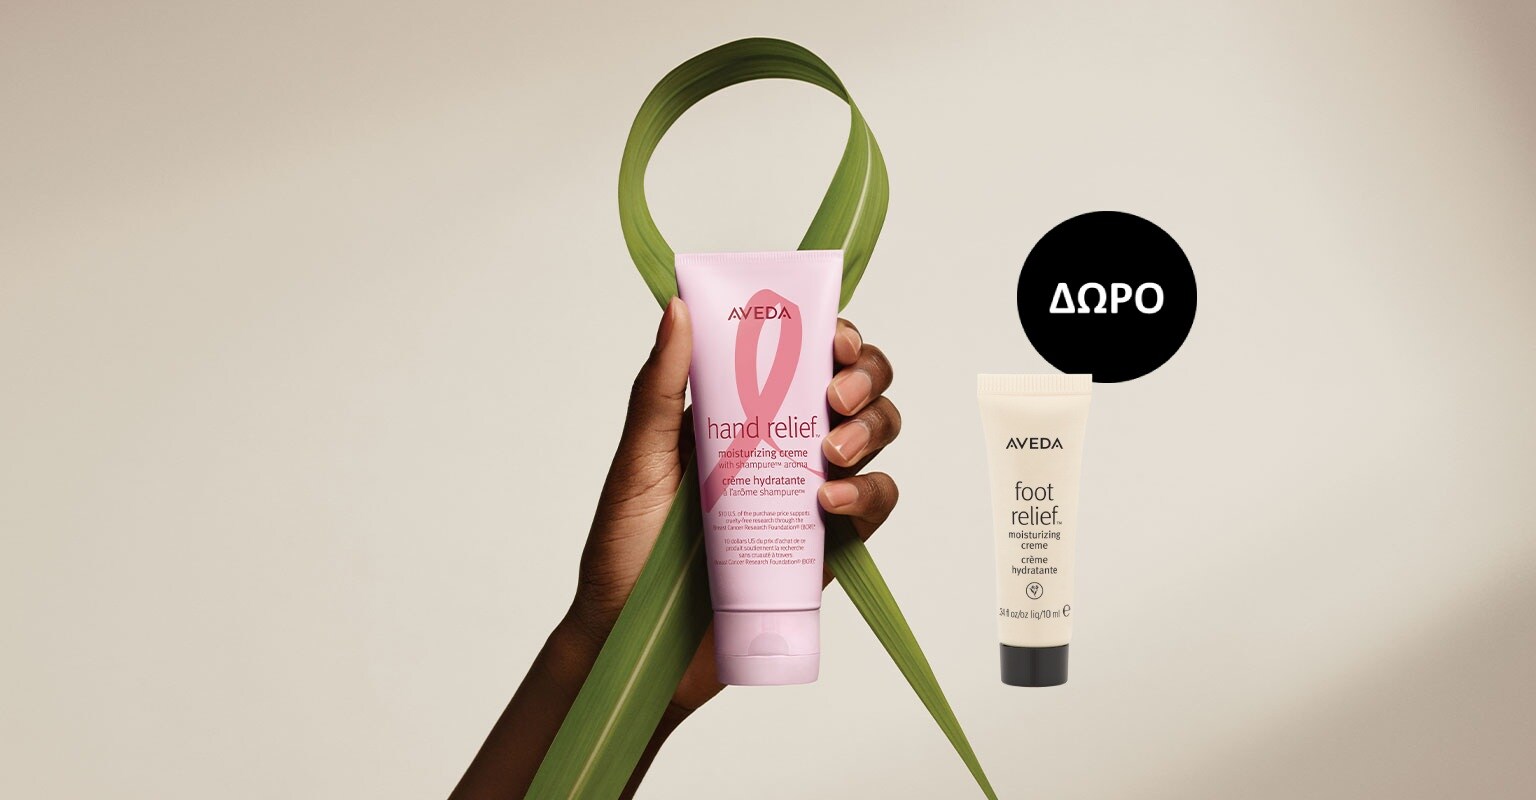 Hope is at hand with limited-edition hand relief where 50% of your purchase supports cruelty-free breast cancer research